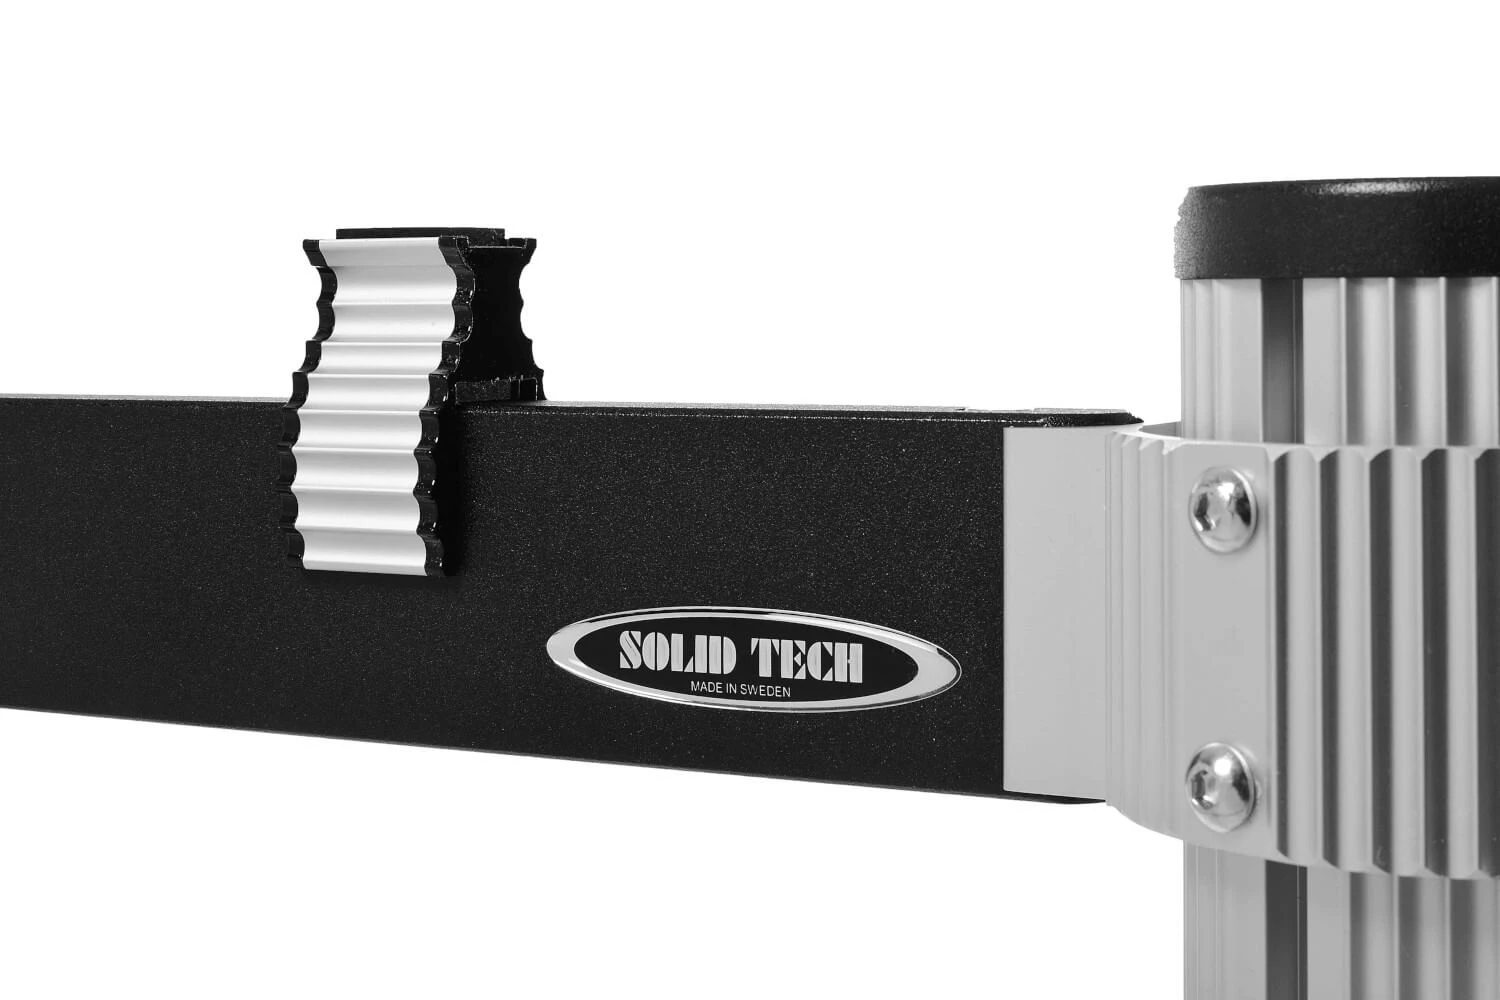 Solid Tech Rack of Silence 4 Reference, Rack System